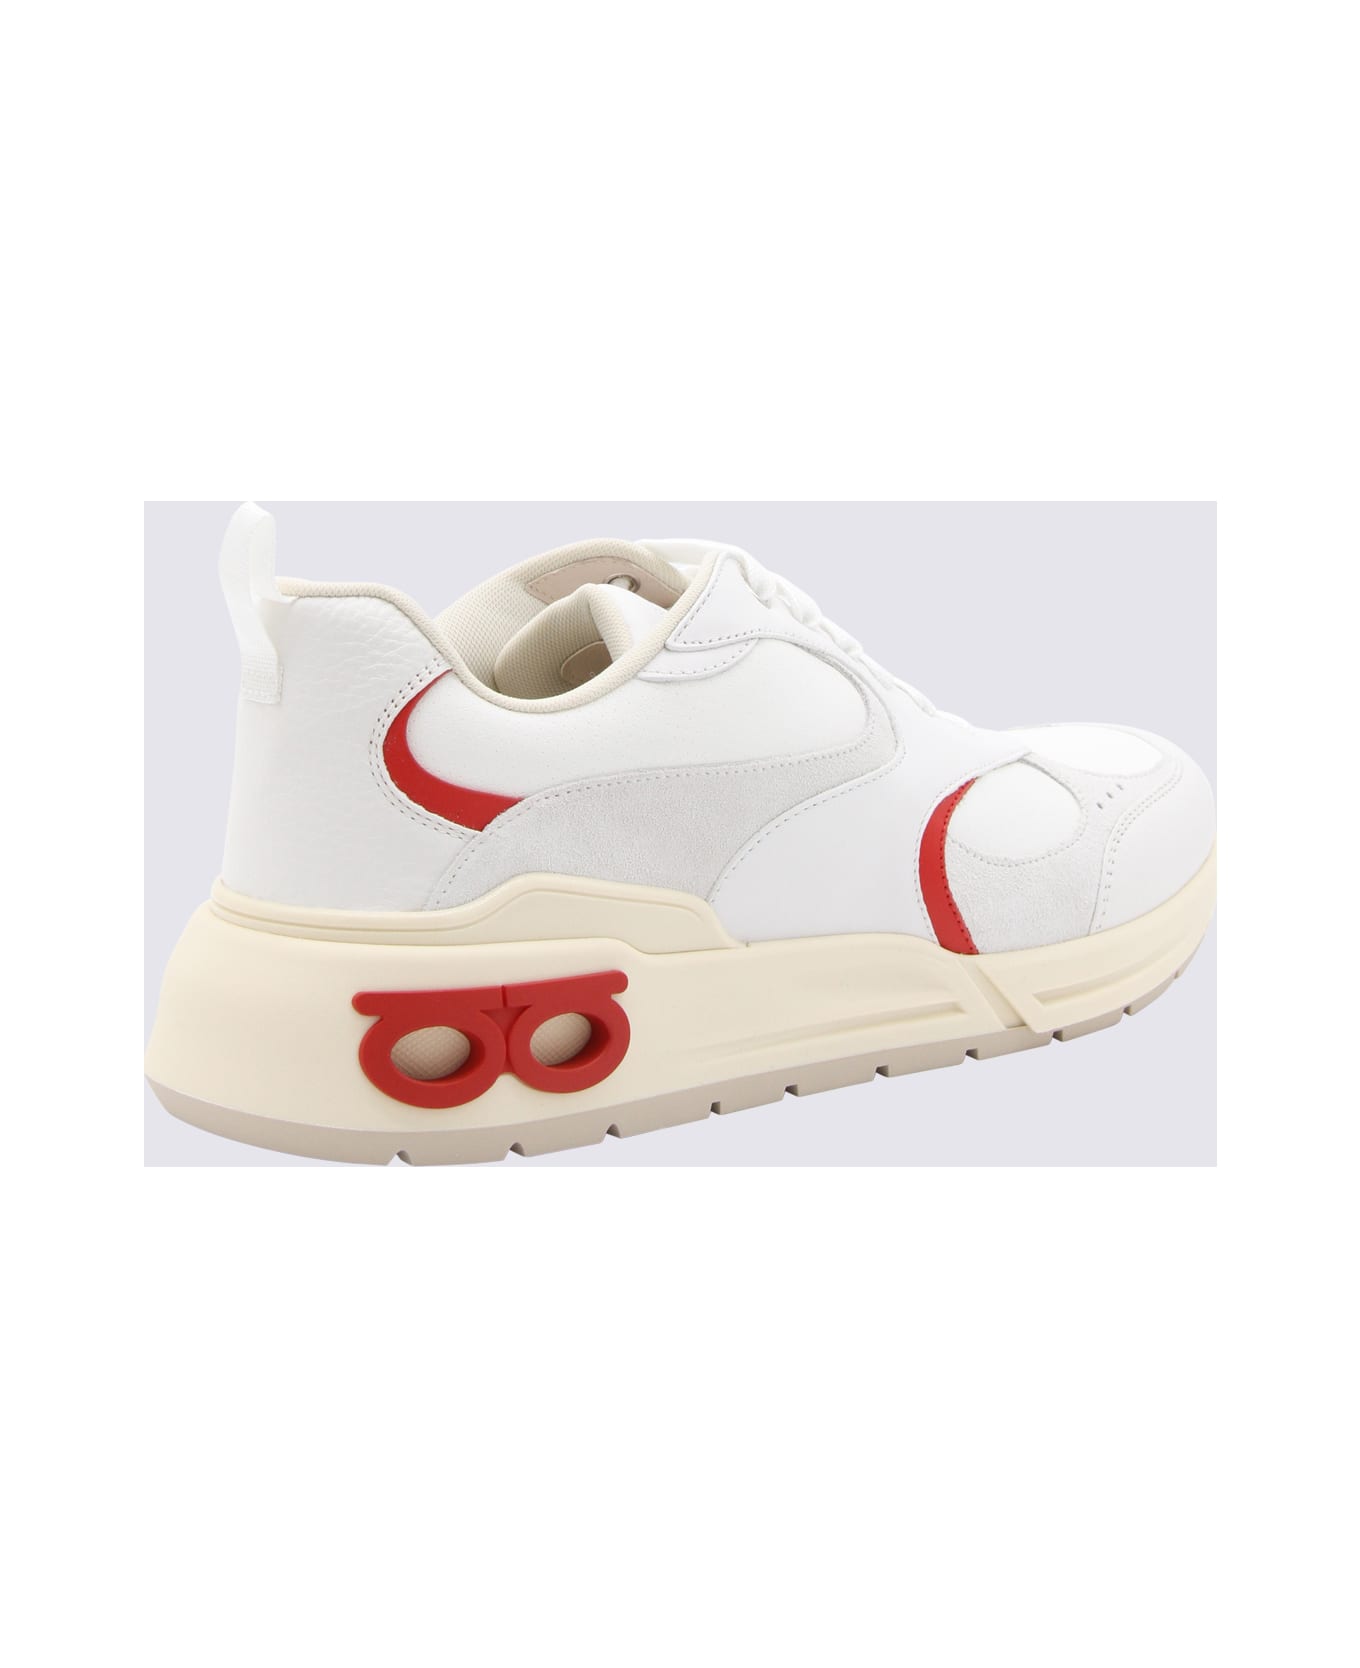 Ferragamo White And Red Leather Sneakers - White スニーカー